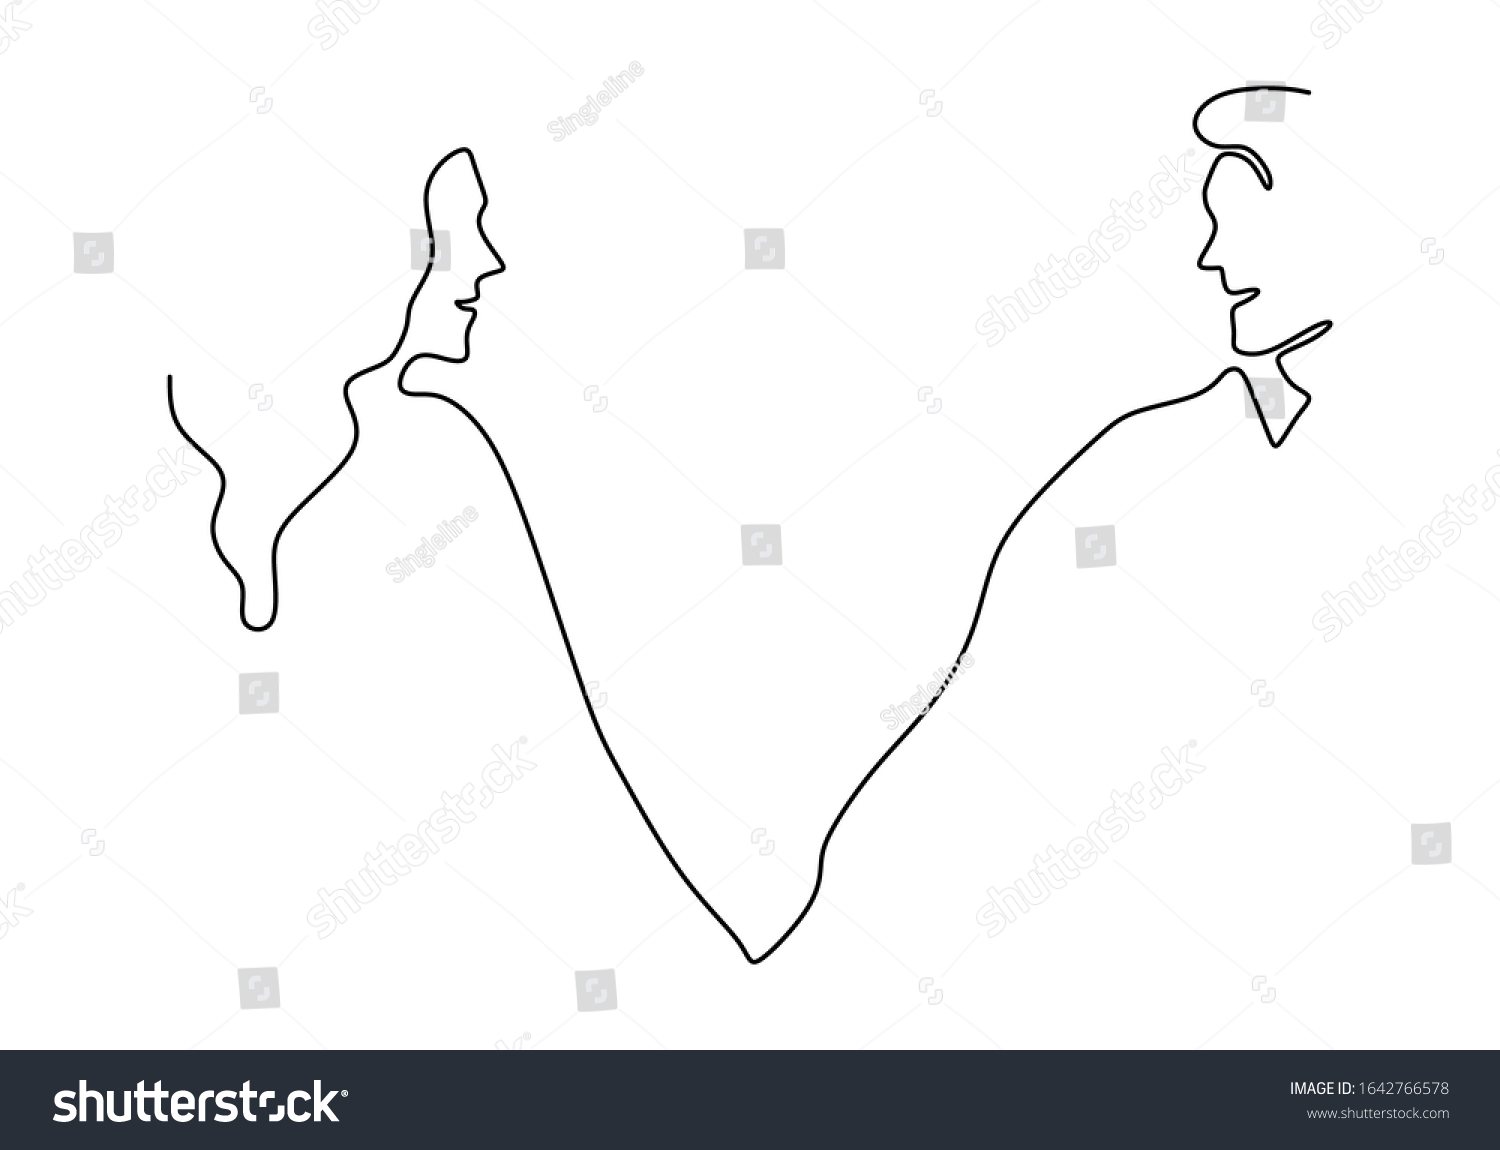 Continuous Line Drawing Romantic Couple Lovers Vector Có Sẵn Miễn Phí Bản Quyền 1642766578 4007